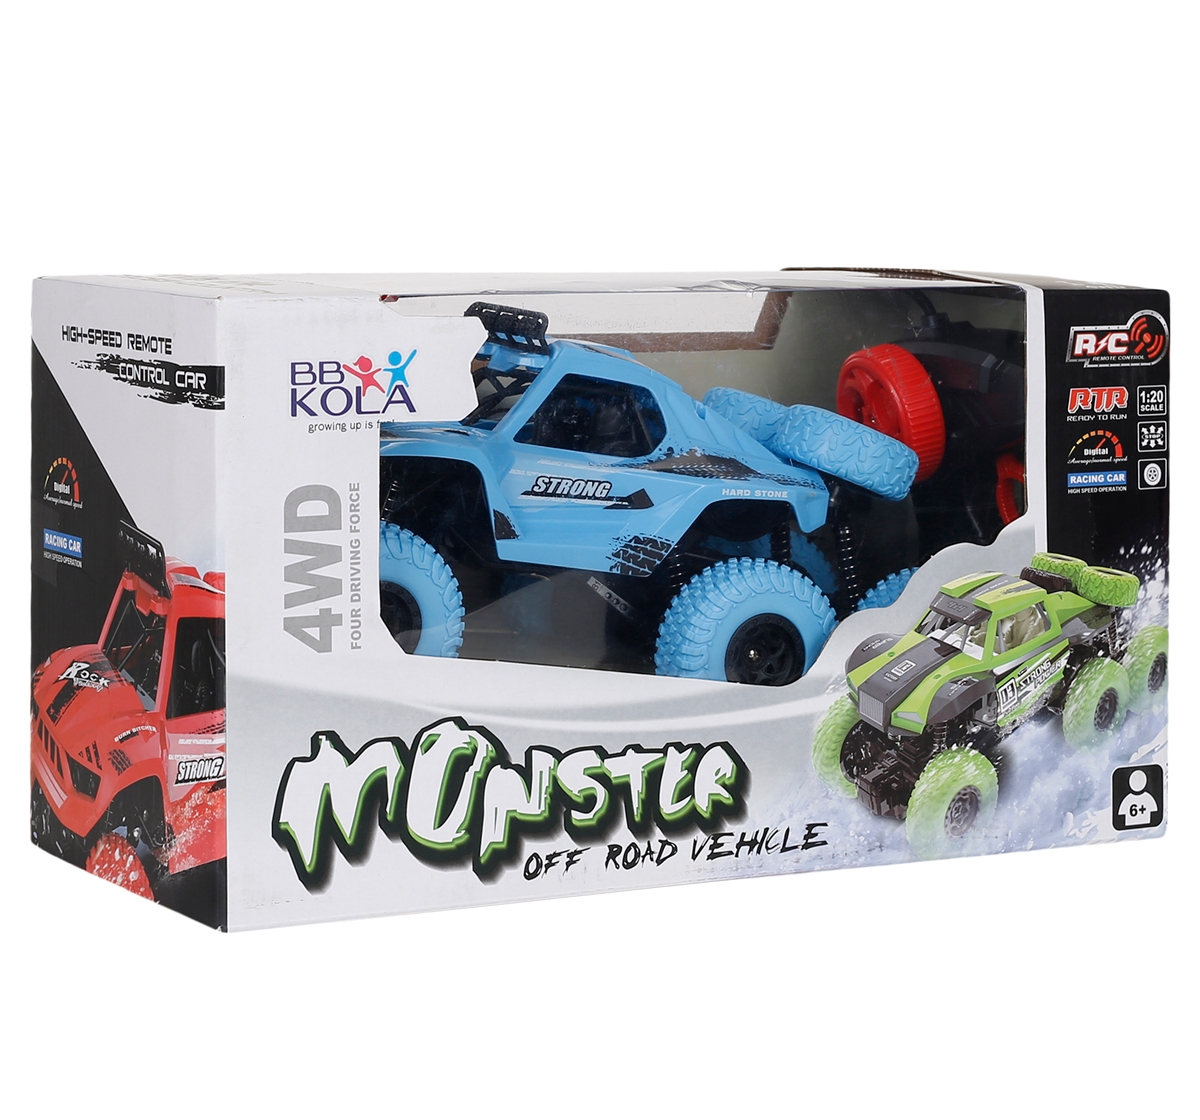 Karma | Ralleyz 1:20 2.4GHz 4 Wheel Drive Monster Off Roader 6X6 Rechargeable Remote Control Car, Multicolour, 7Y+ 4